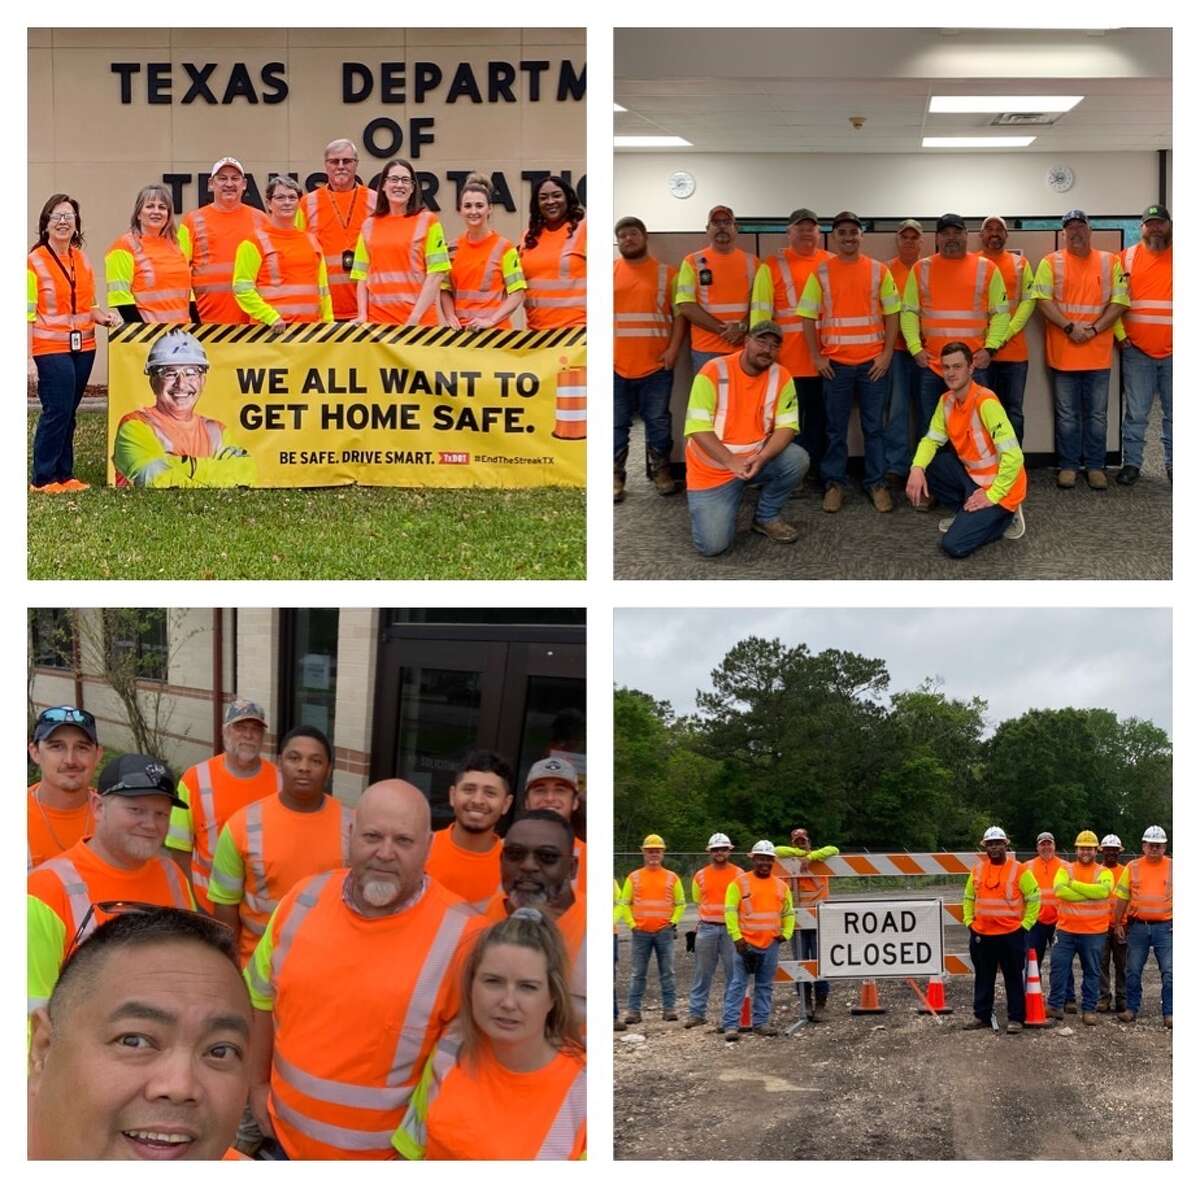 The Texas Department of Transportation urges motorists to help put a stop to work zone crashes and fatalities. TxDOT reported 1,394 crashes in work zones in the Beaumont District in 2021, which resulted in the death of 21 people.